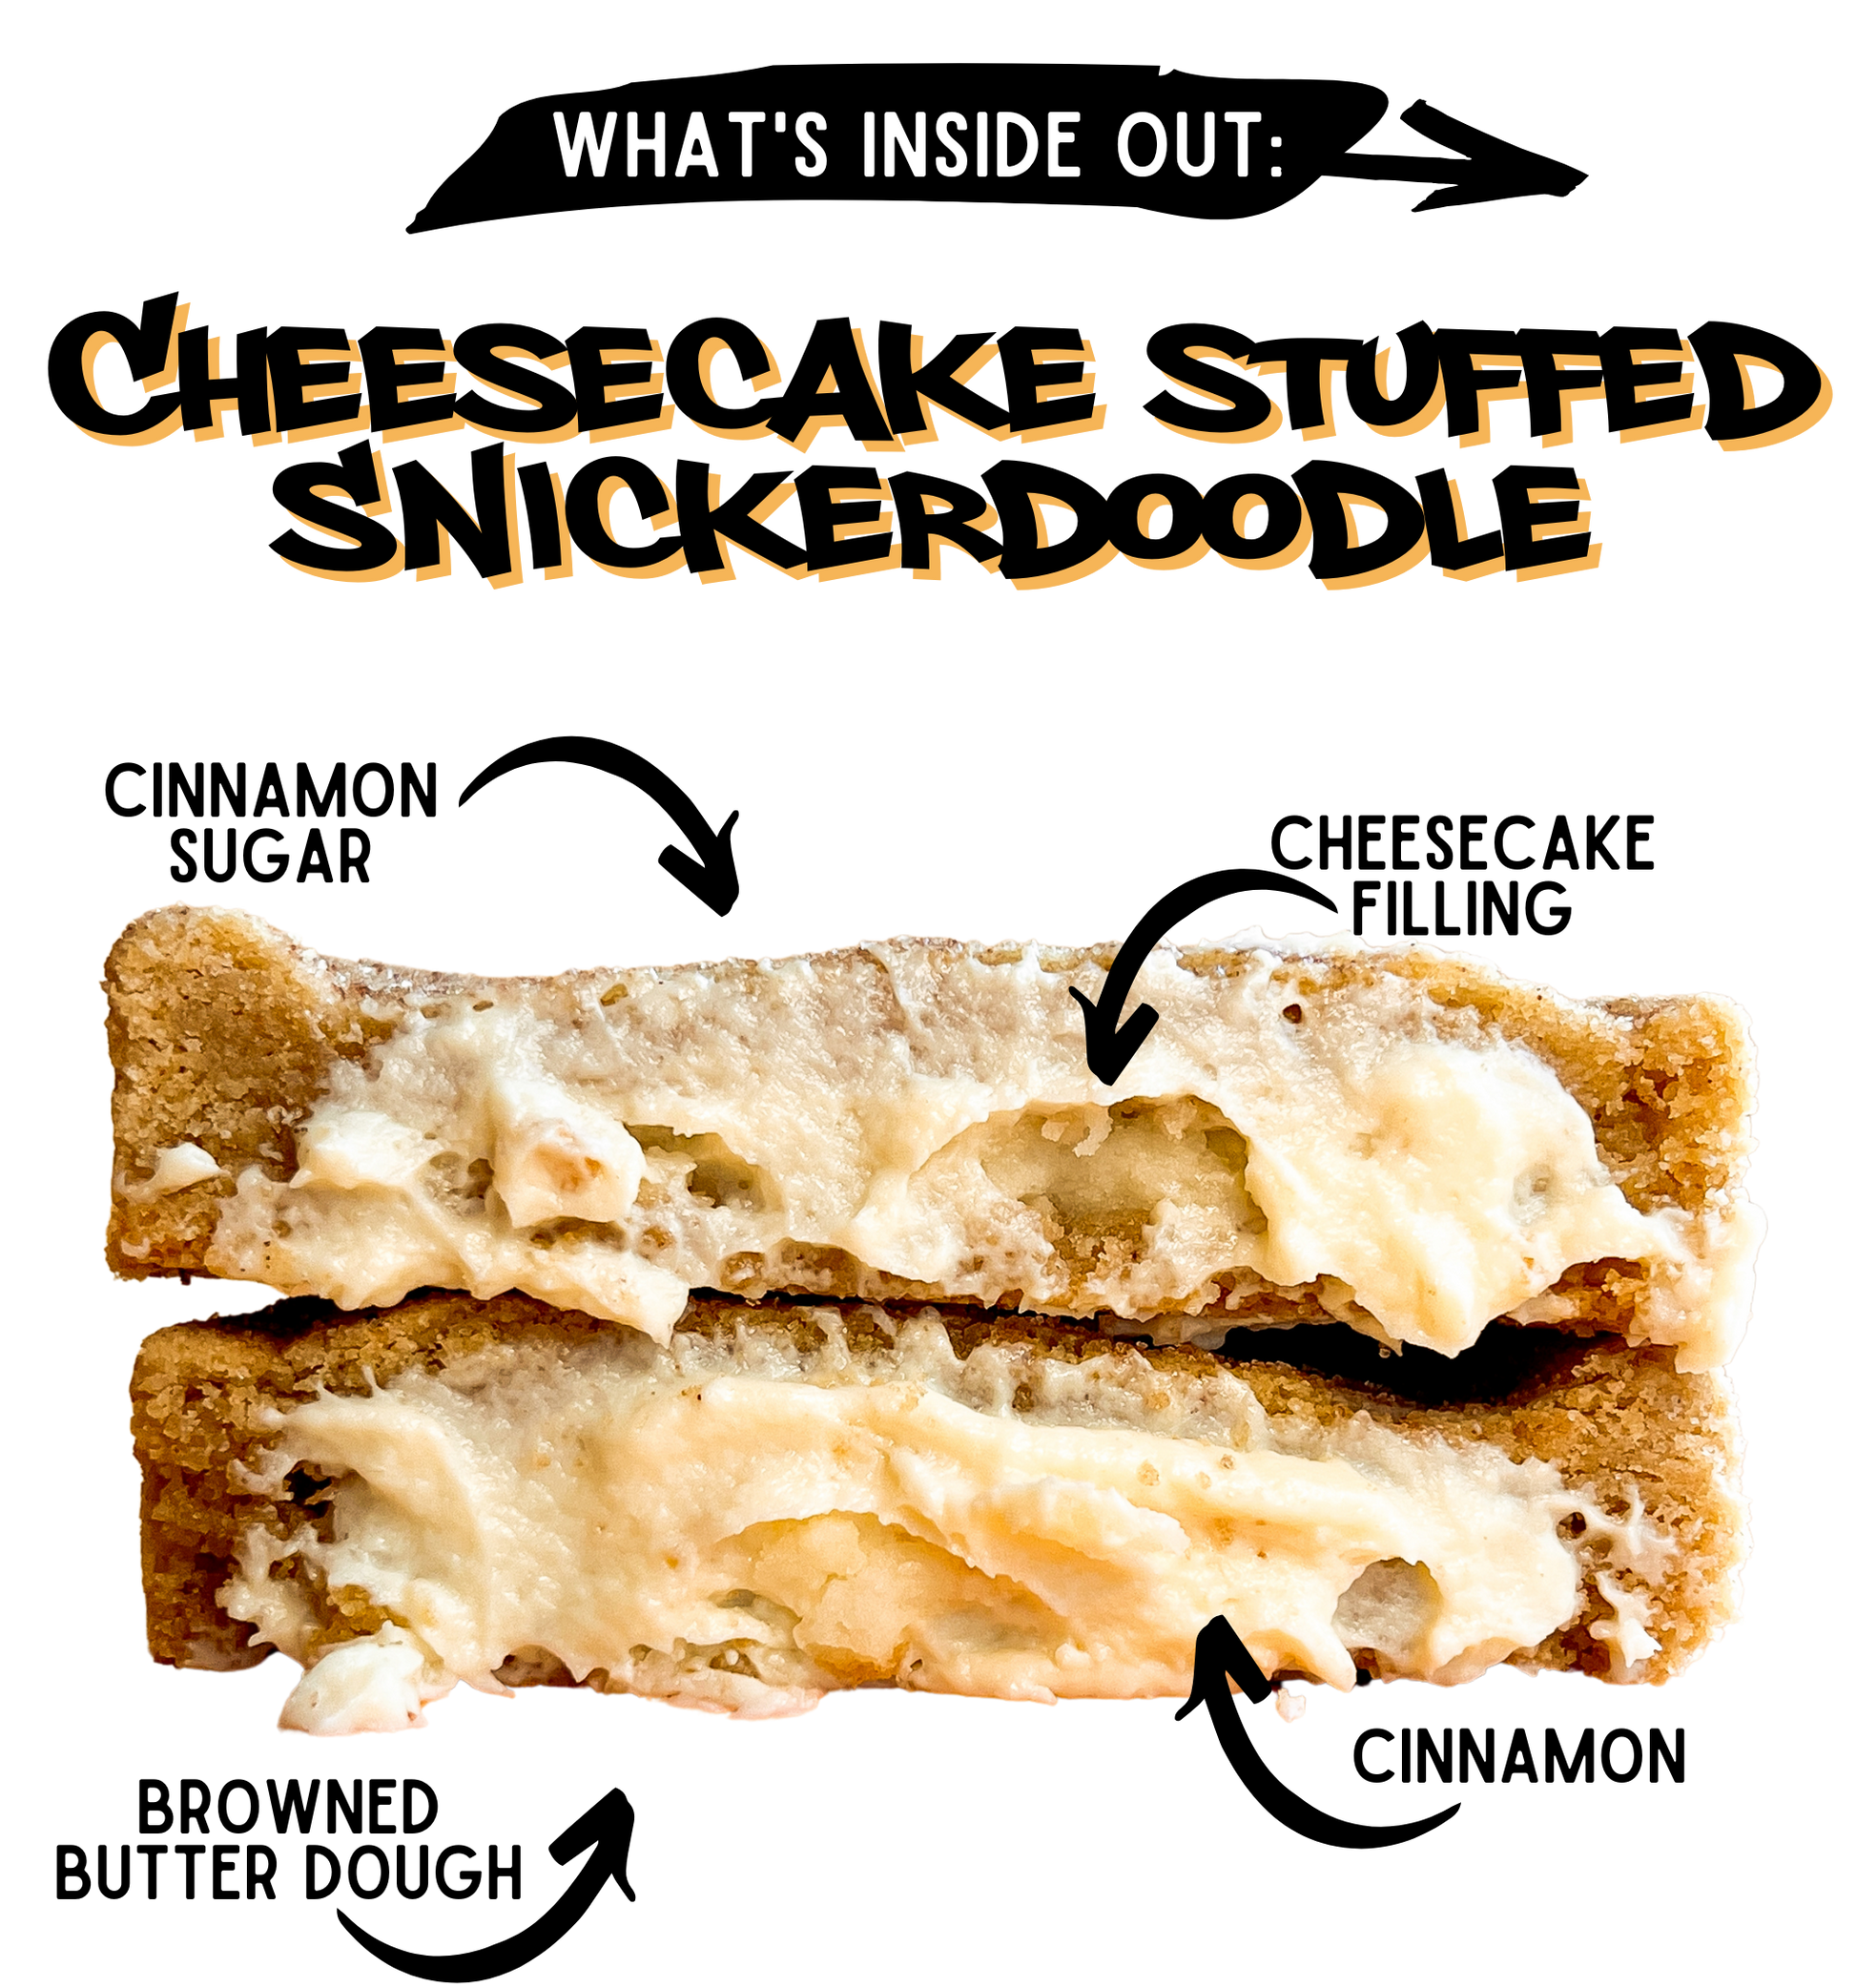 Inside Out Cookie Cheesecake stuffed snickerdoodle cookie